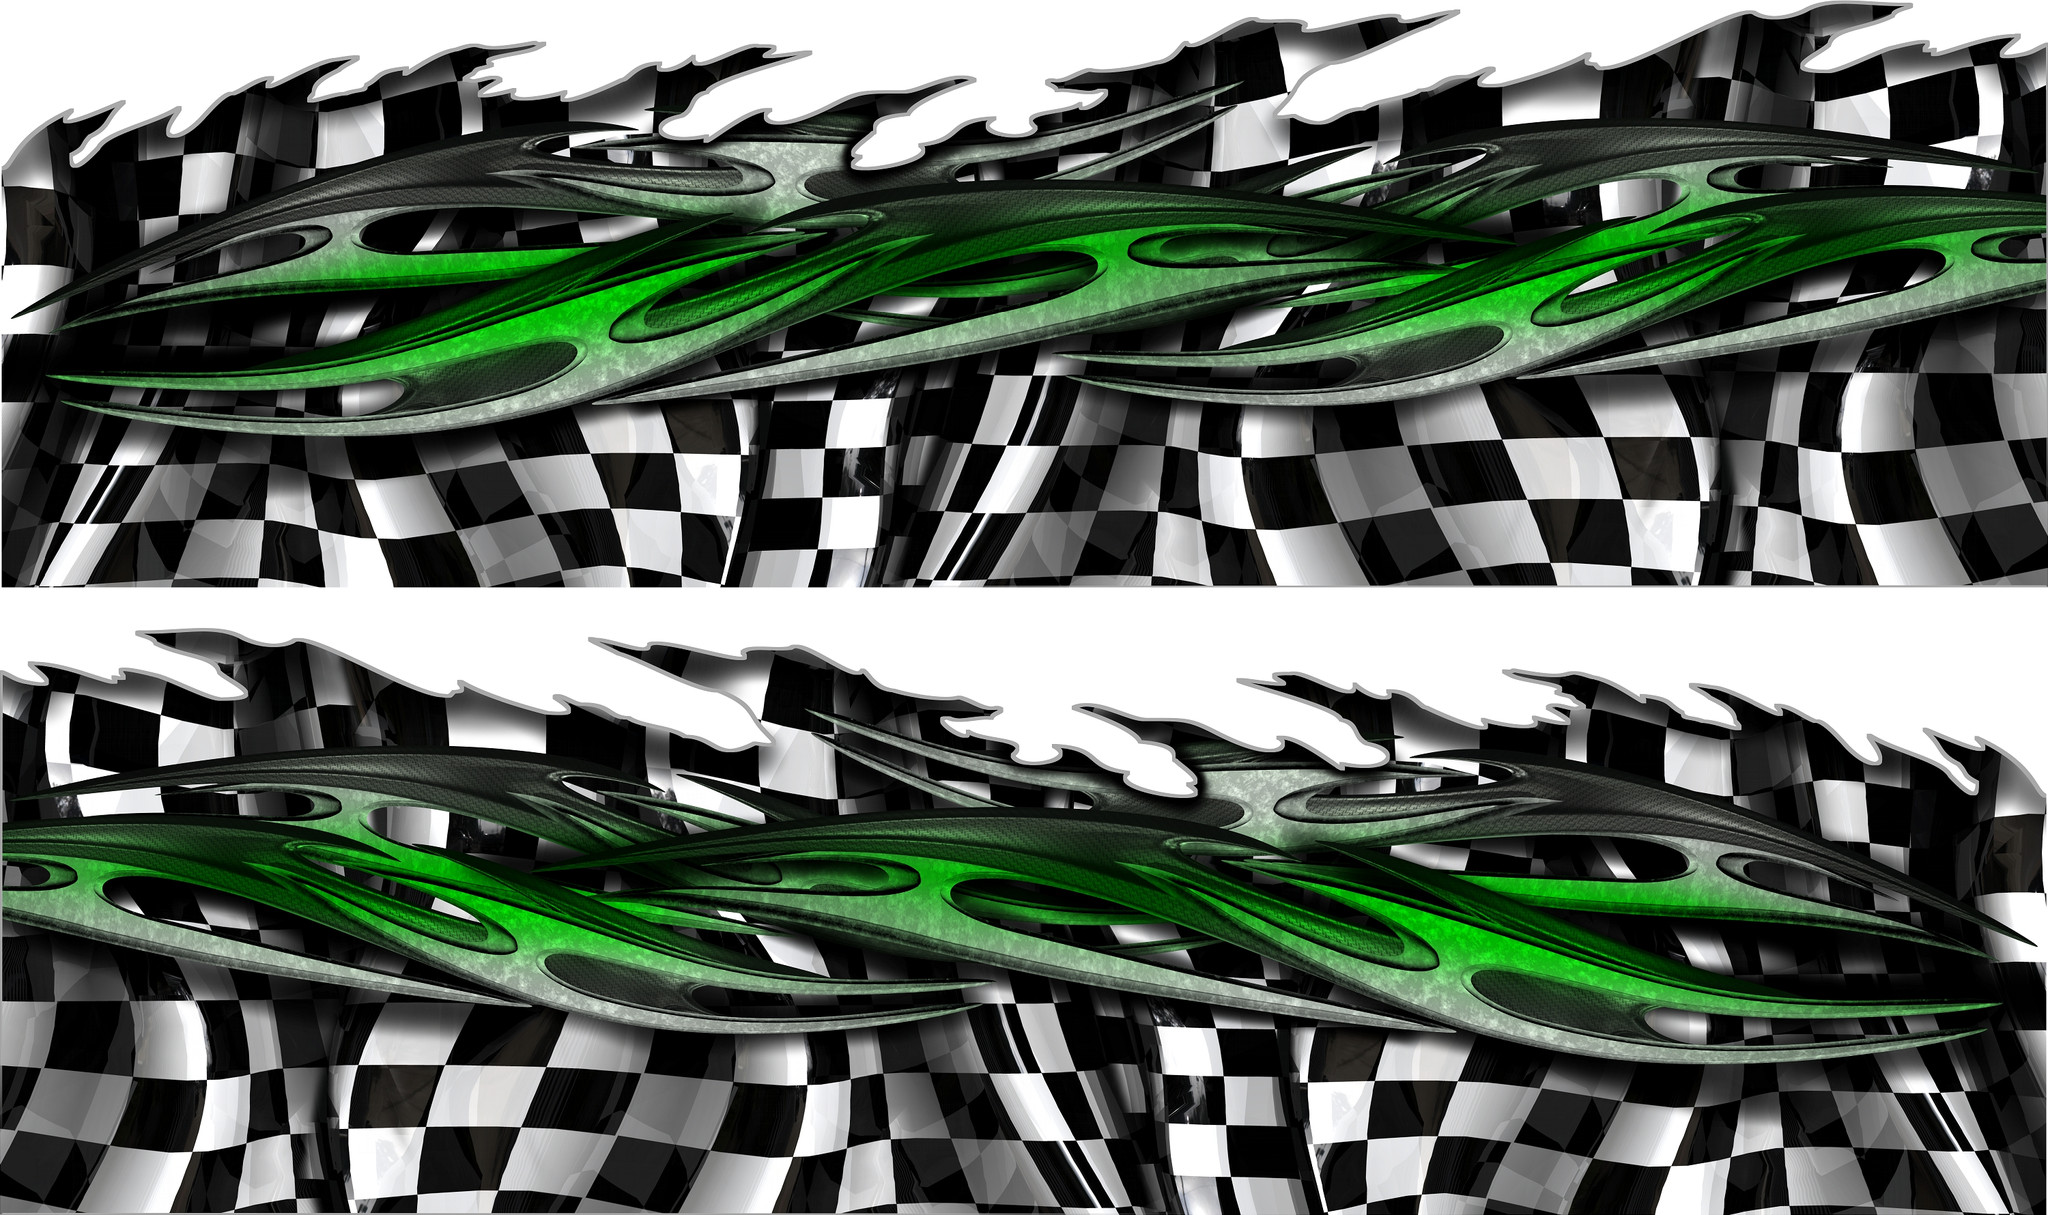 12-checkered-graphic-designs-for-cars-images-checkered-flag-vinyl-car-graphics-free-race-car